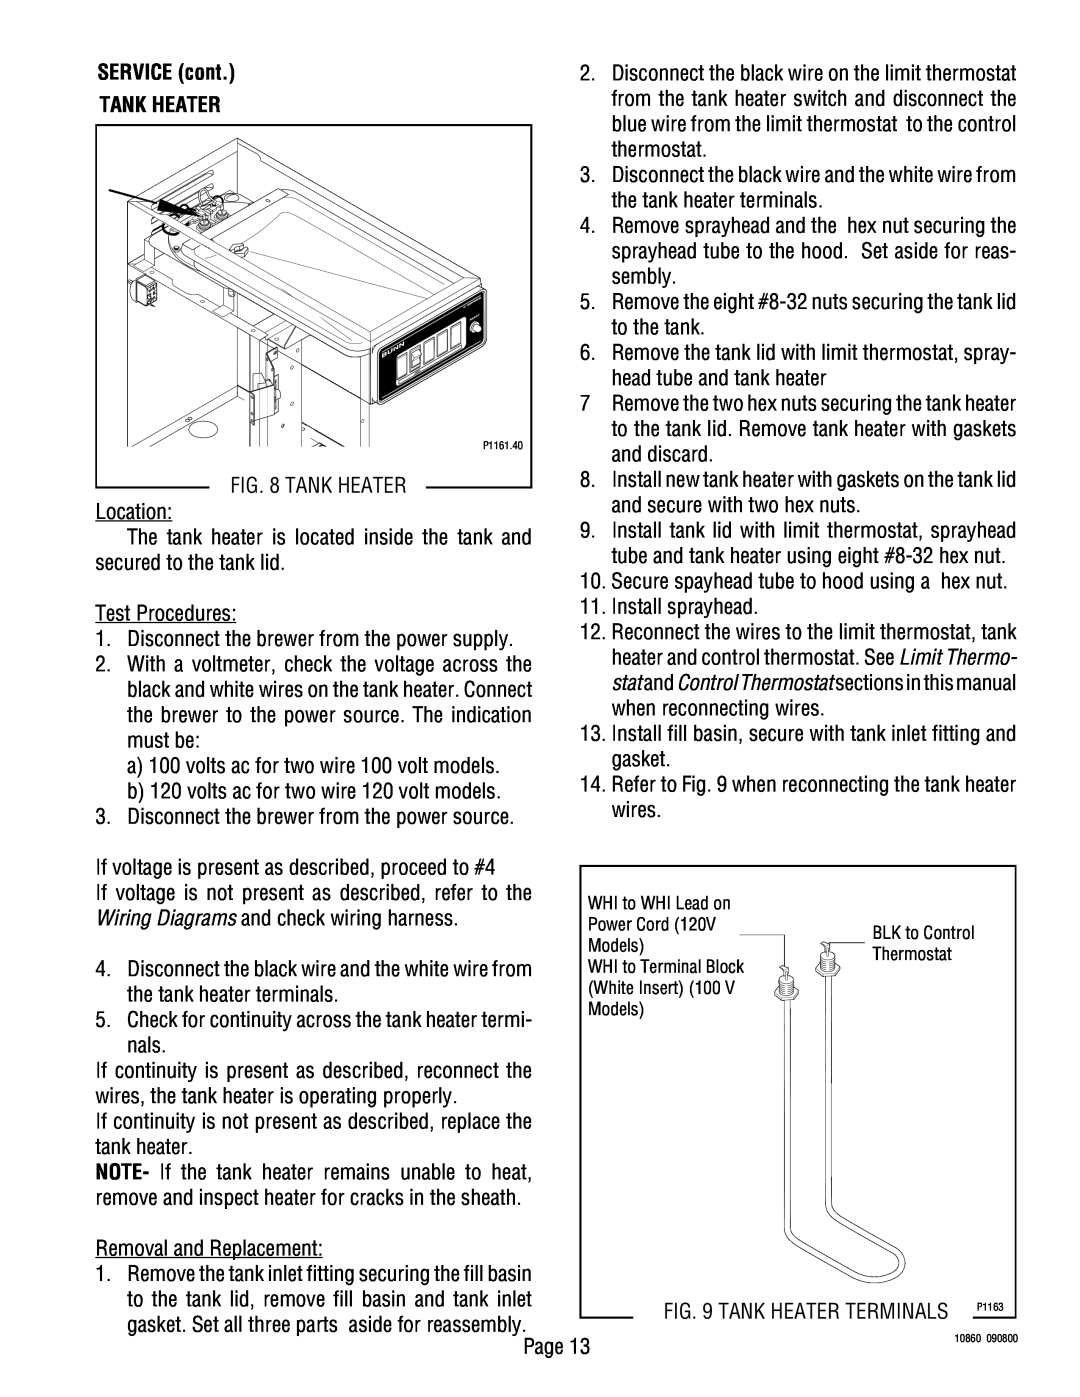 Bunn VP17B service manual SERVICE cont TANK HEATER, Remove the tank inlet fitting securing the fill basin 